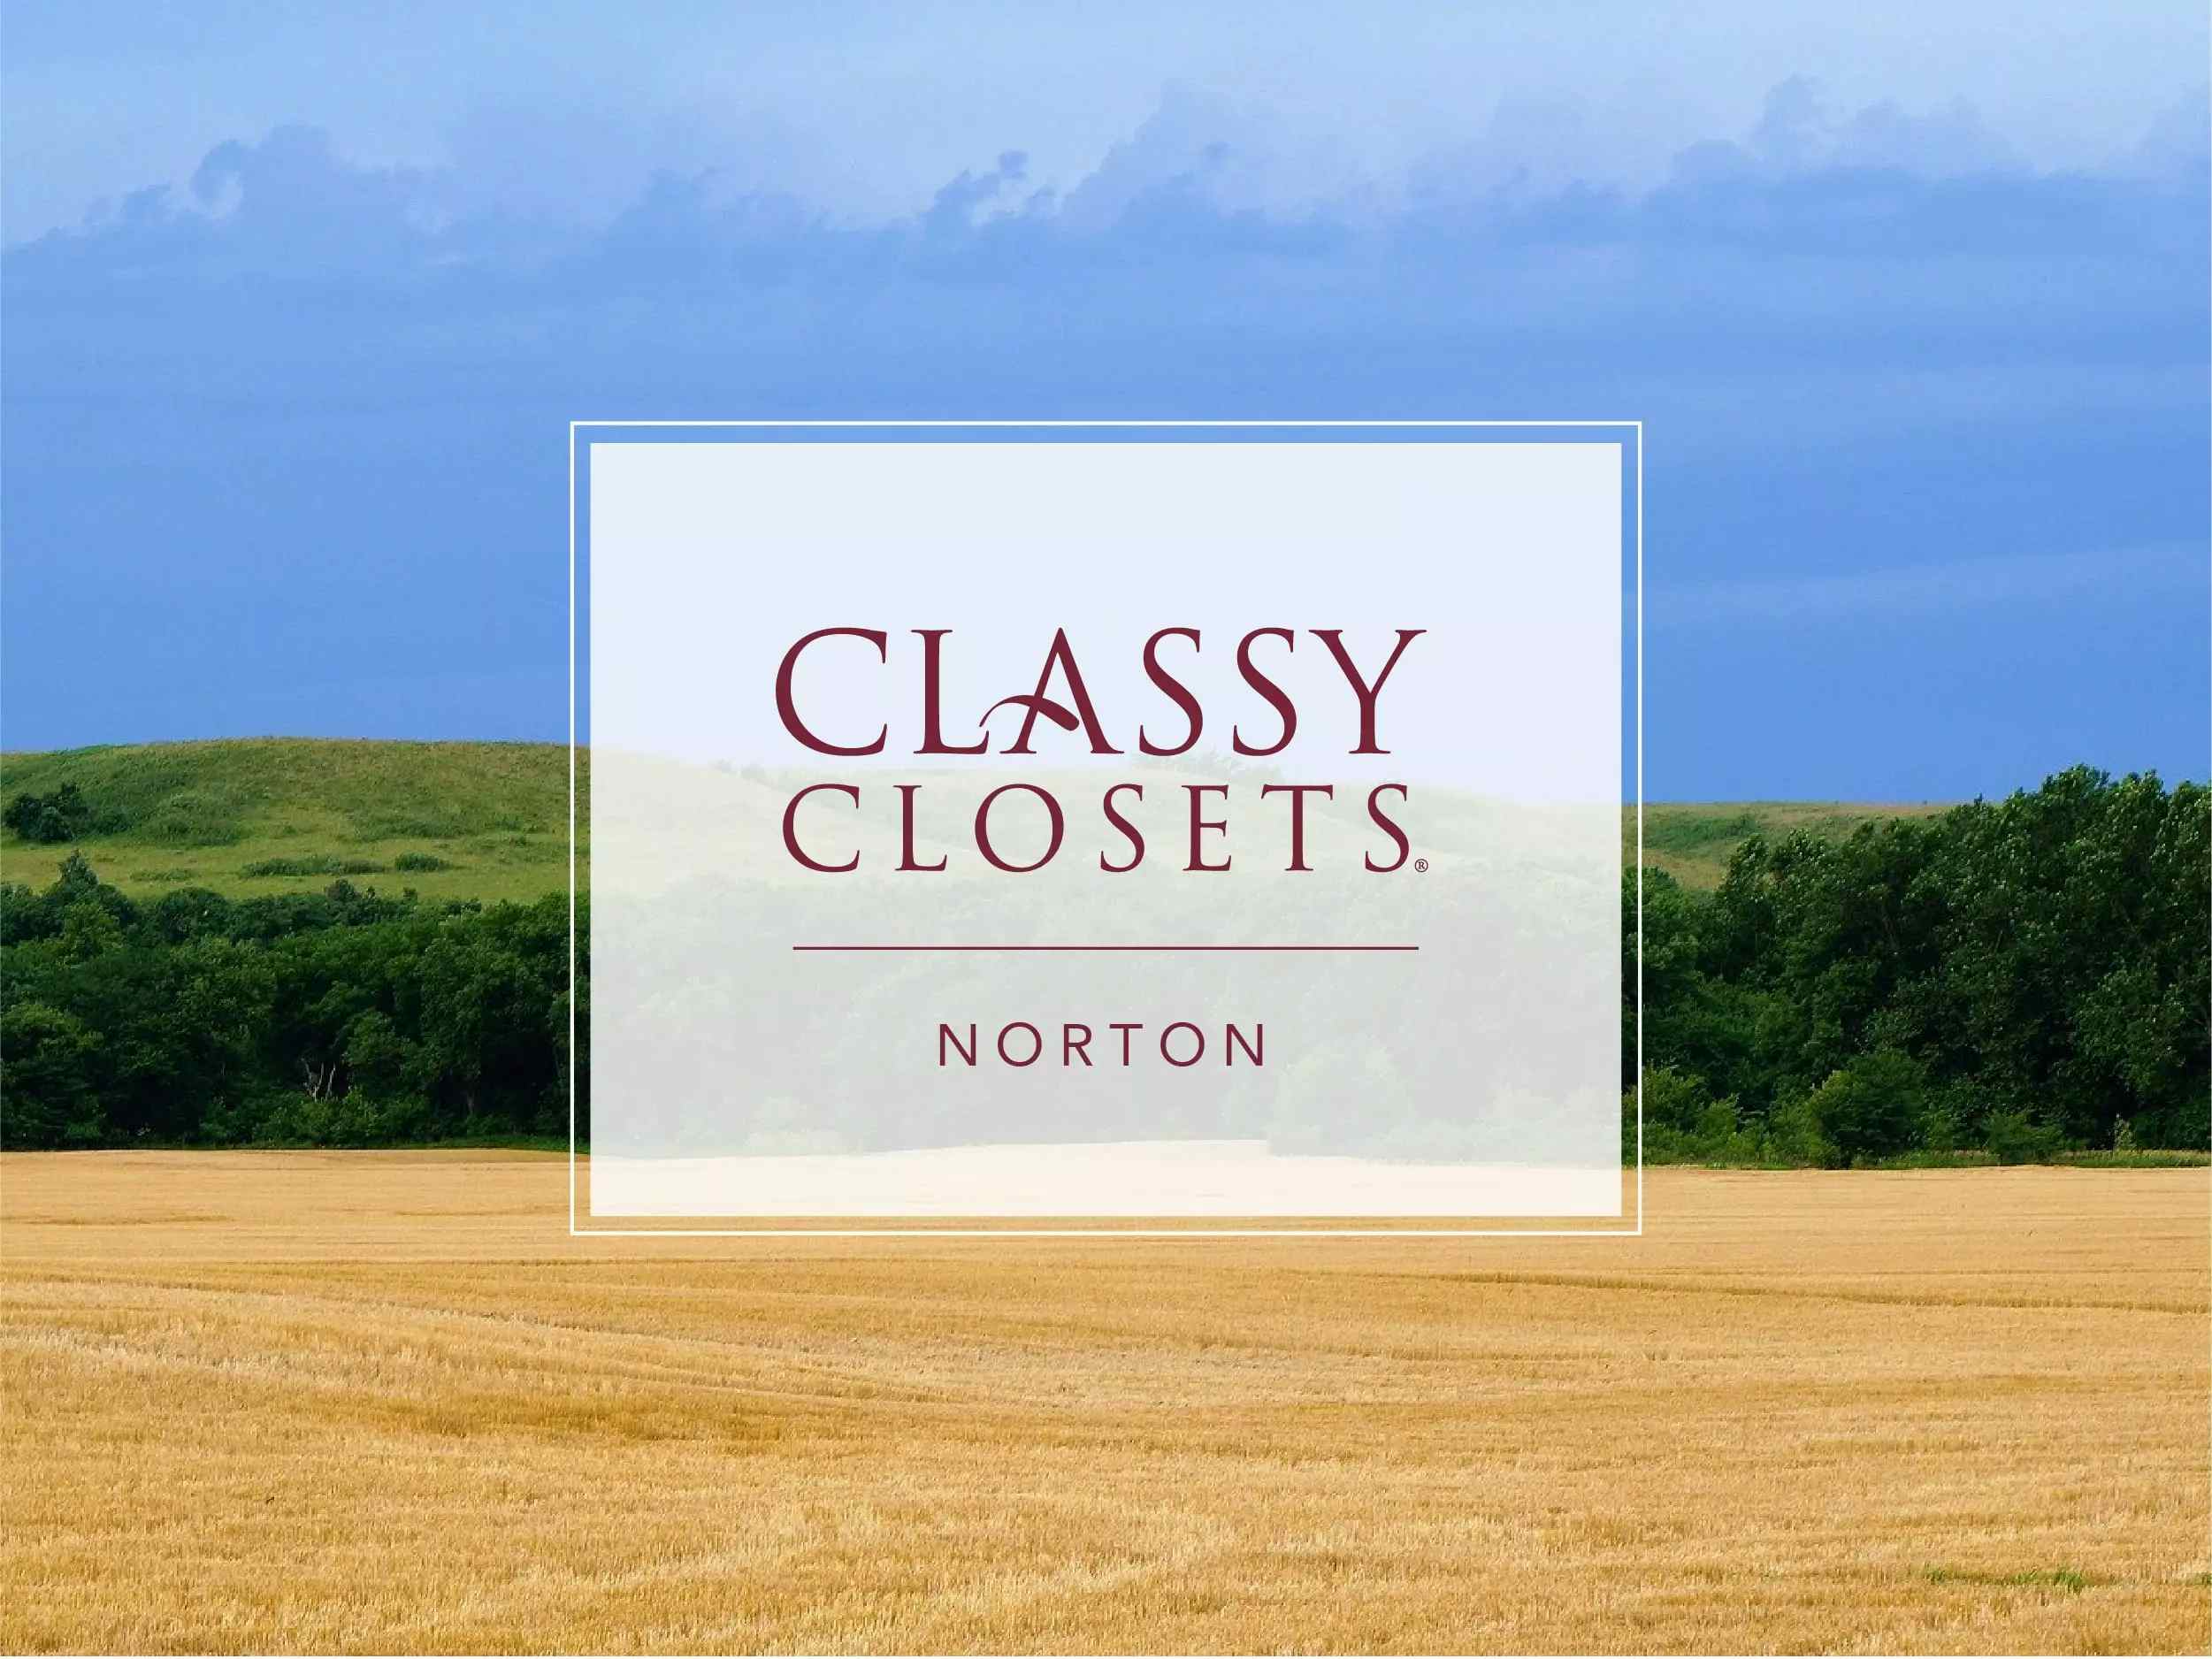 showroom on the location page-/images/locations/Norton.webp